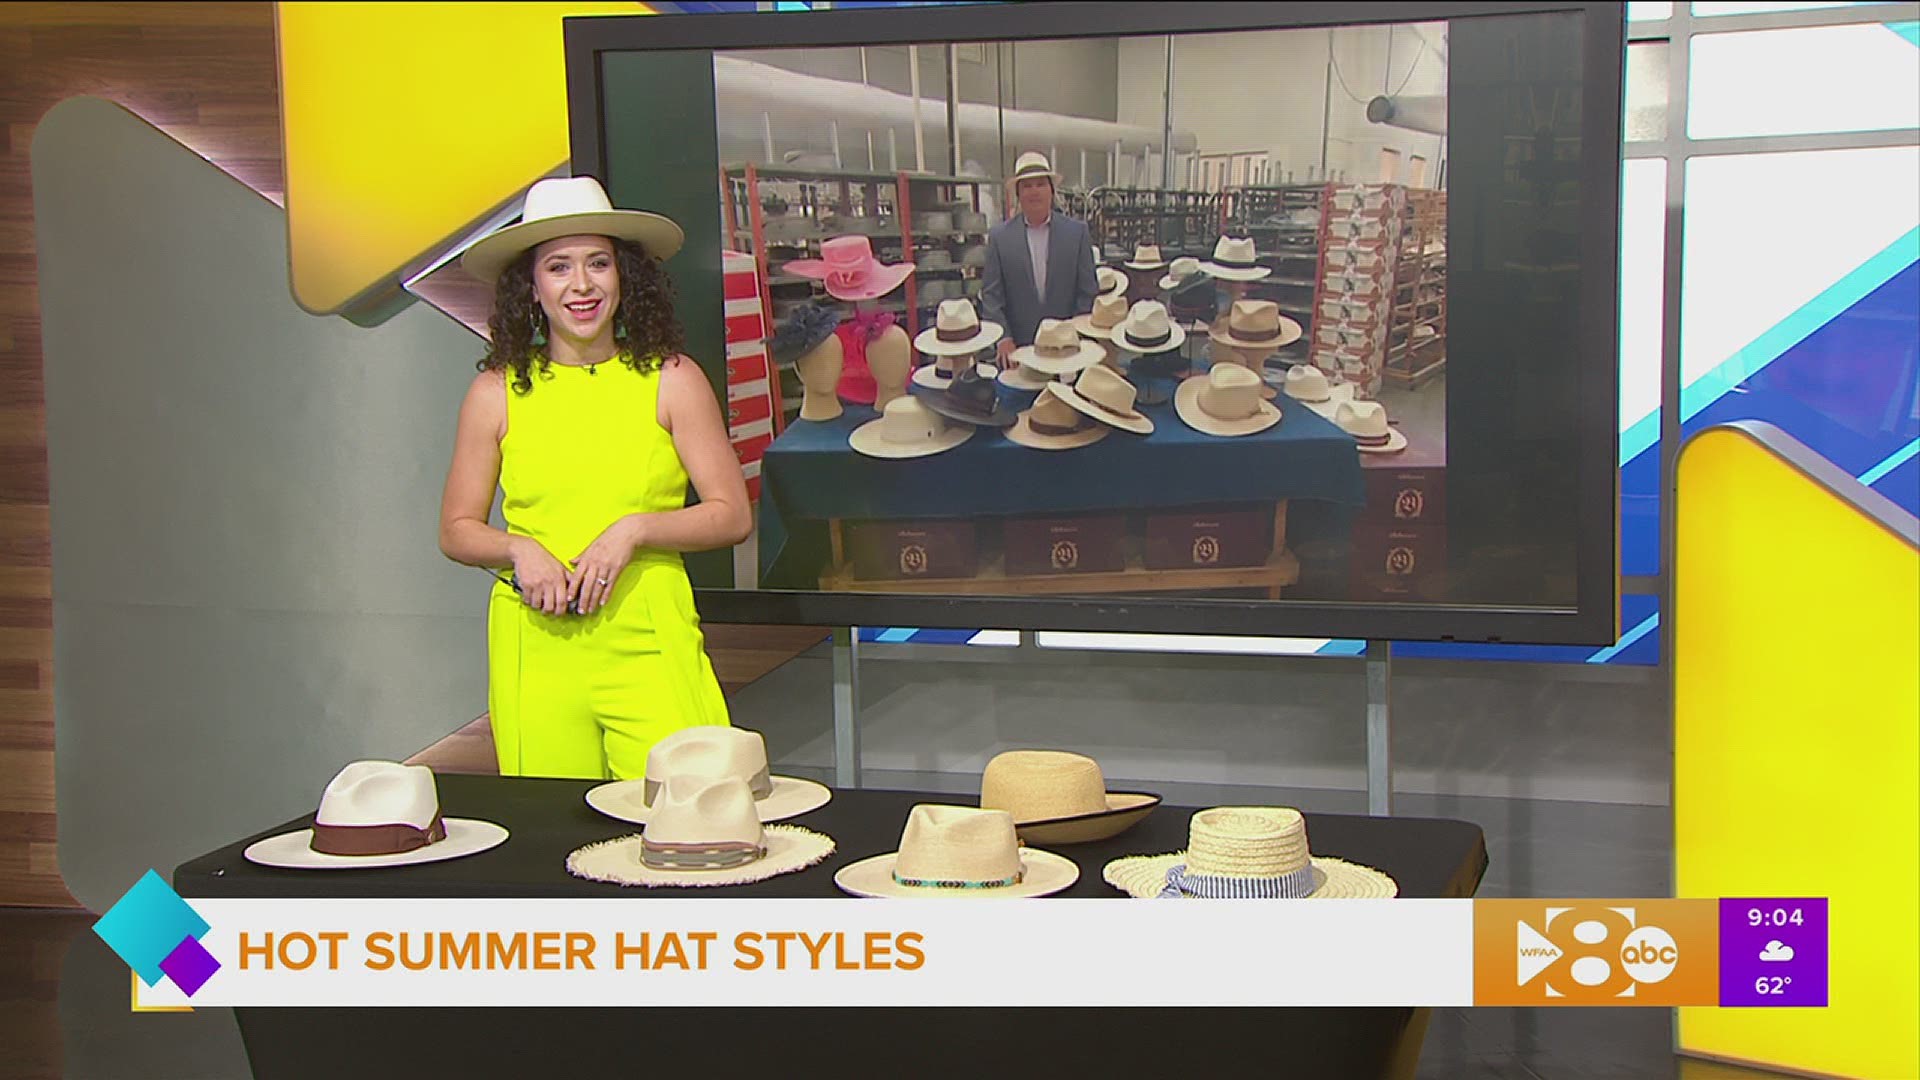 See inside the Milano Hat Factory in Garland for a look at new summer hat trends for men and women